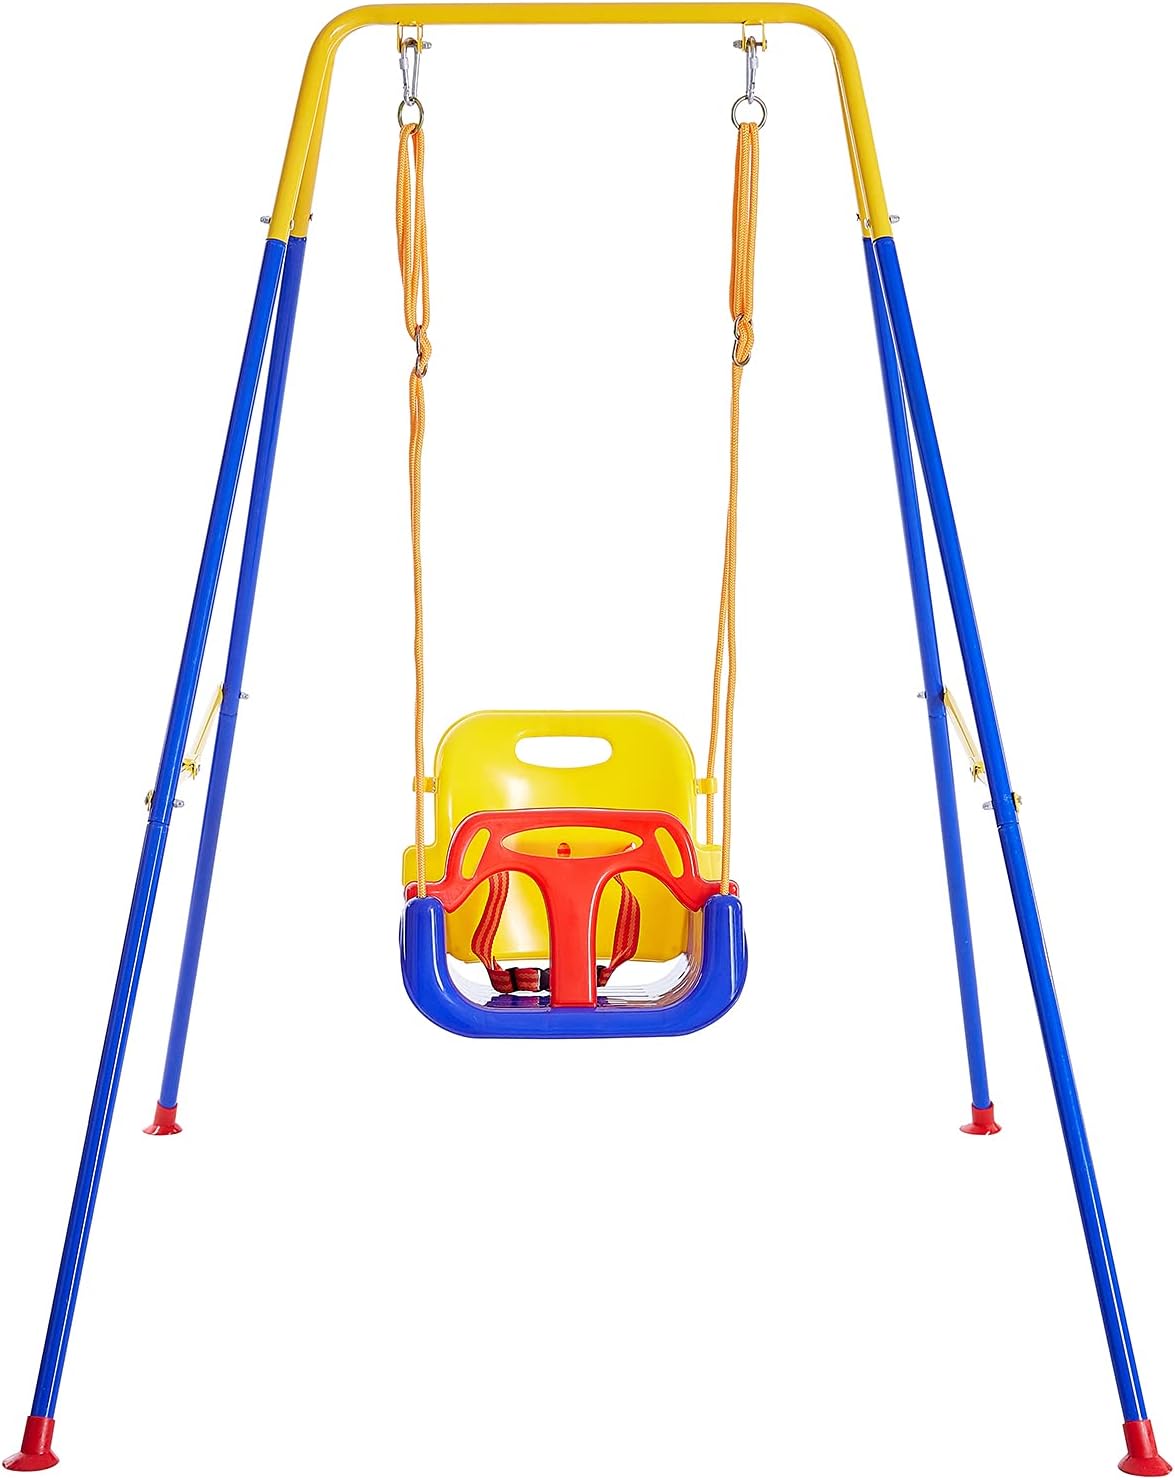 FUNLIO 3-in-1 Swing Set for Toddler with 4 Sandbags, [...]